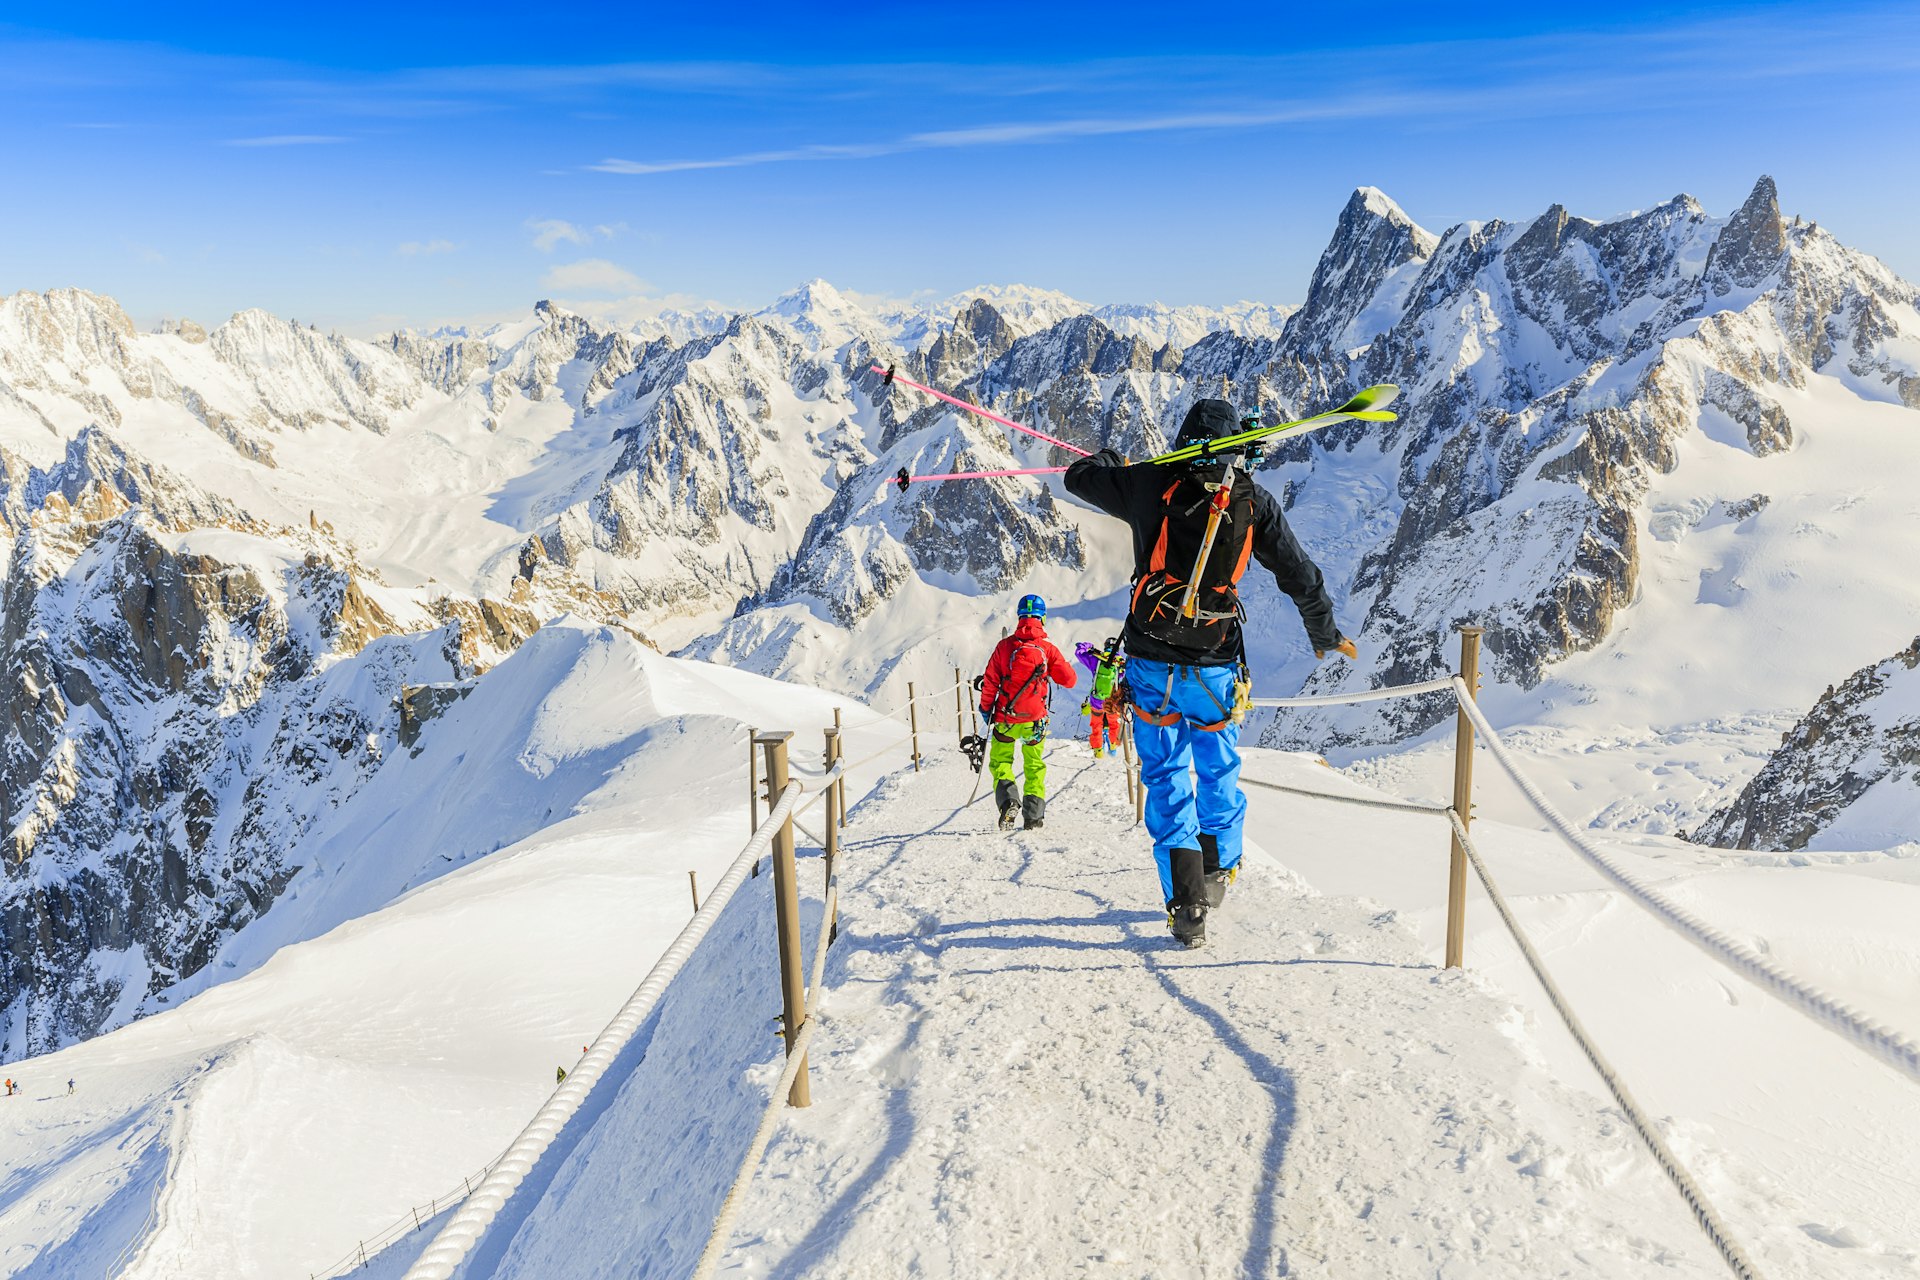 Freeriders carrying their extreme ski equipment in Aiguille du Midi, French Alps